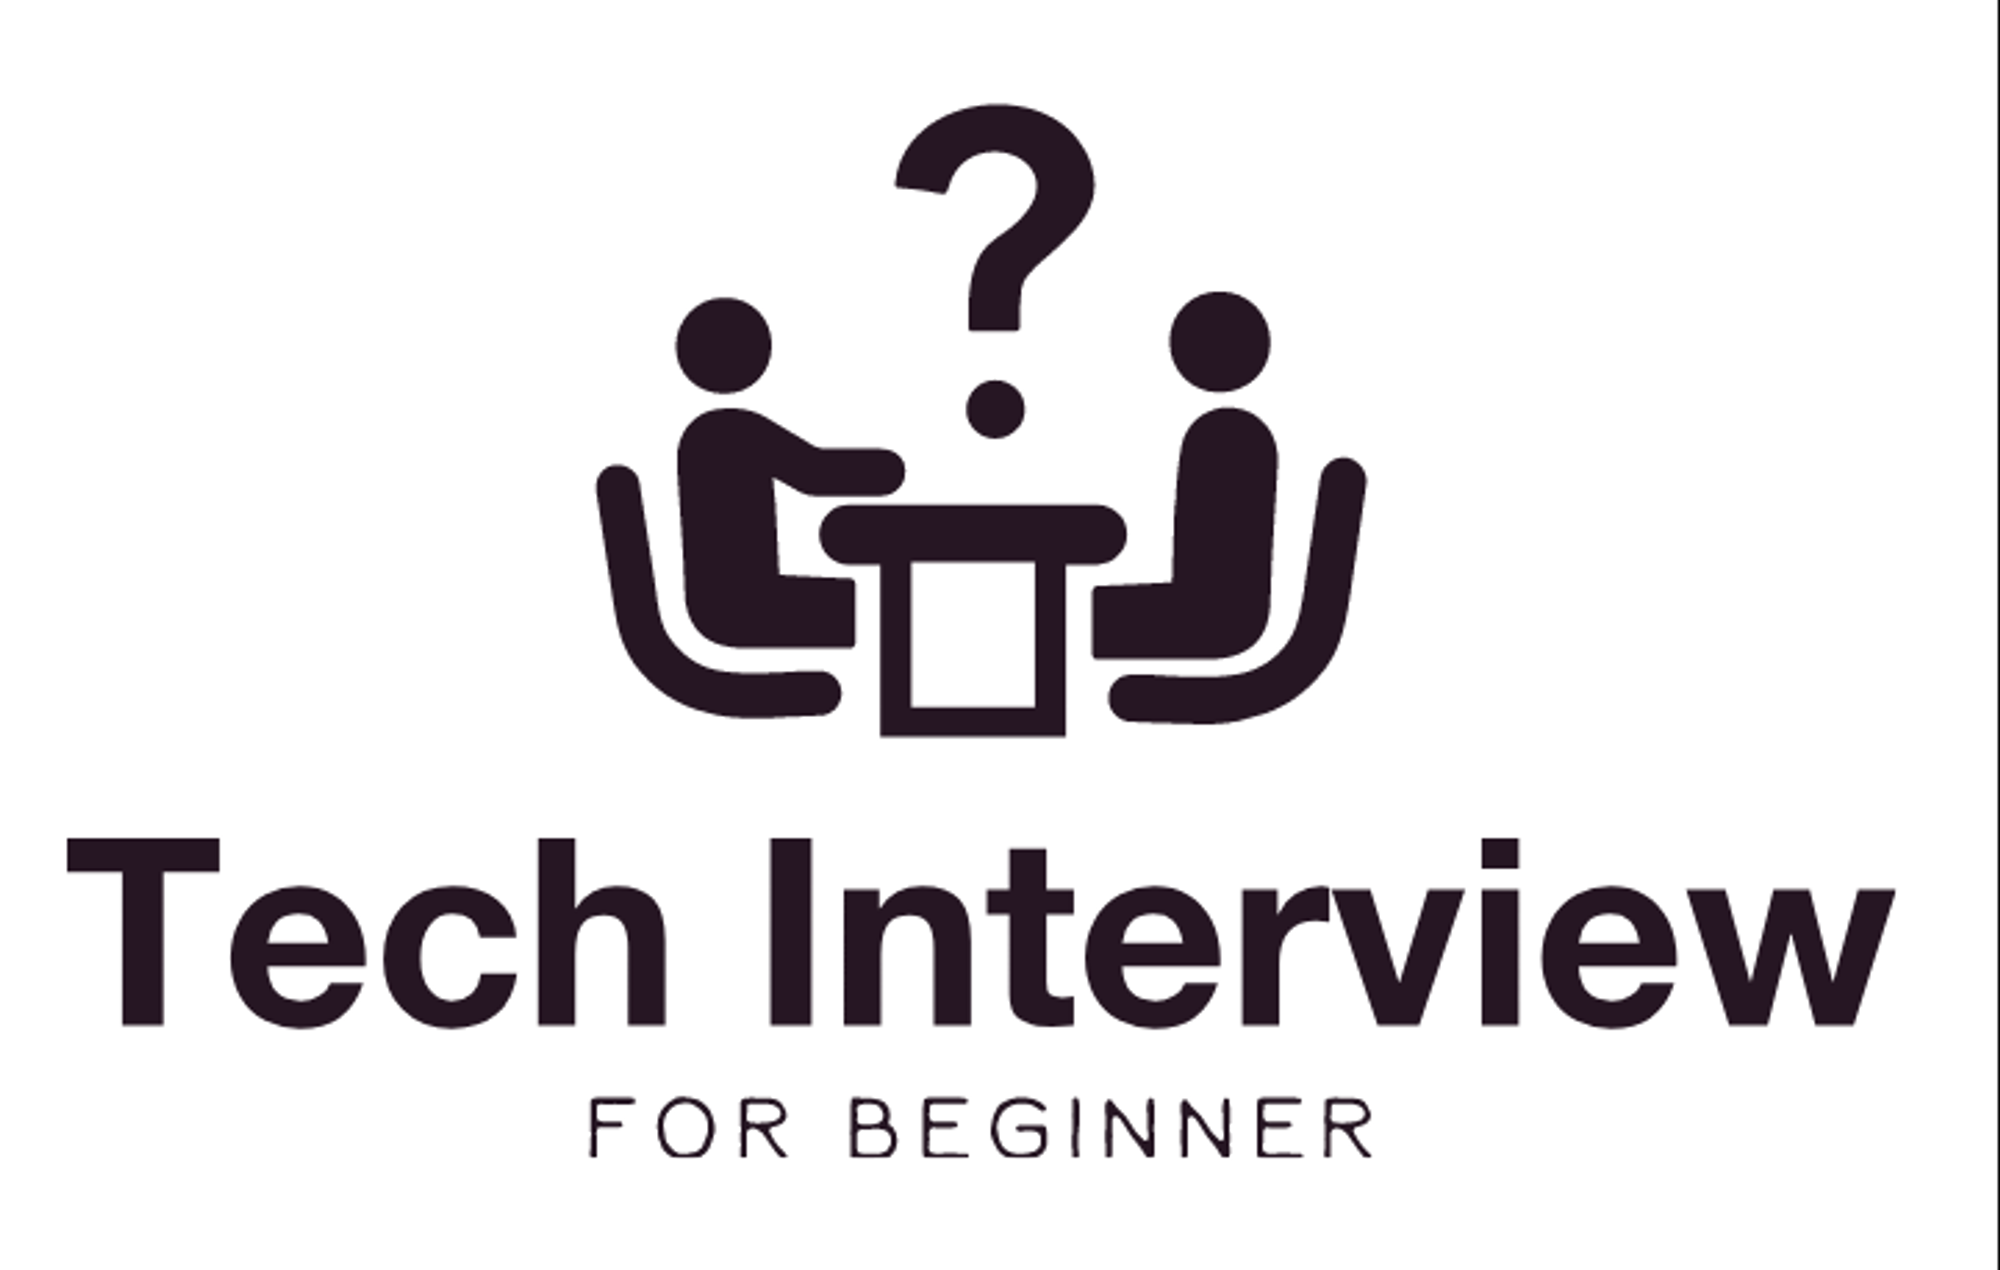 Interview_Question_for_Beginner/Algorithm at master · JaeYeopHan/Interview_Question_for_Beginner